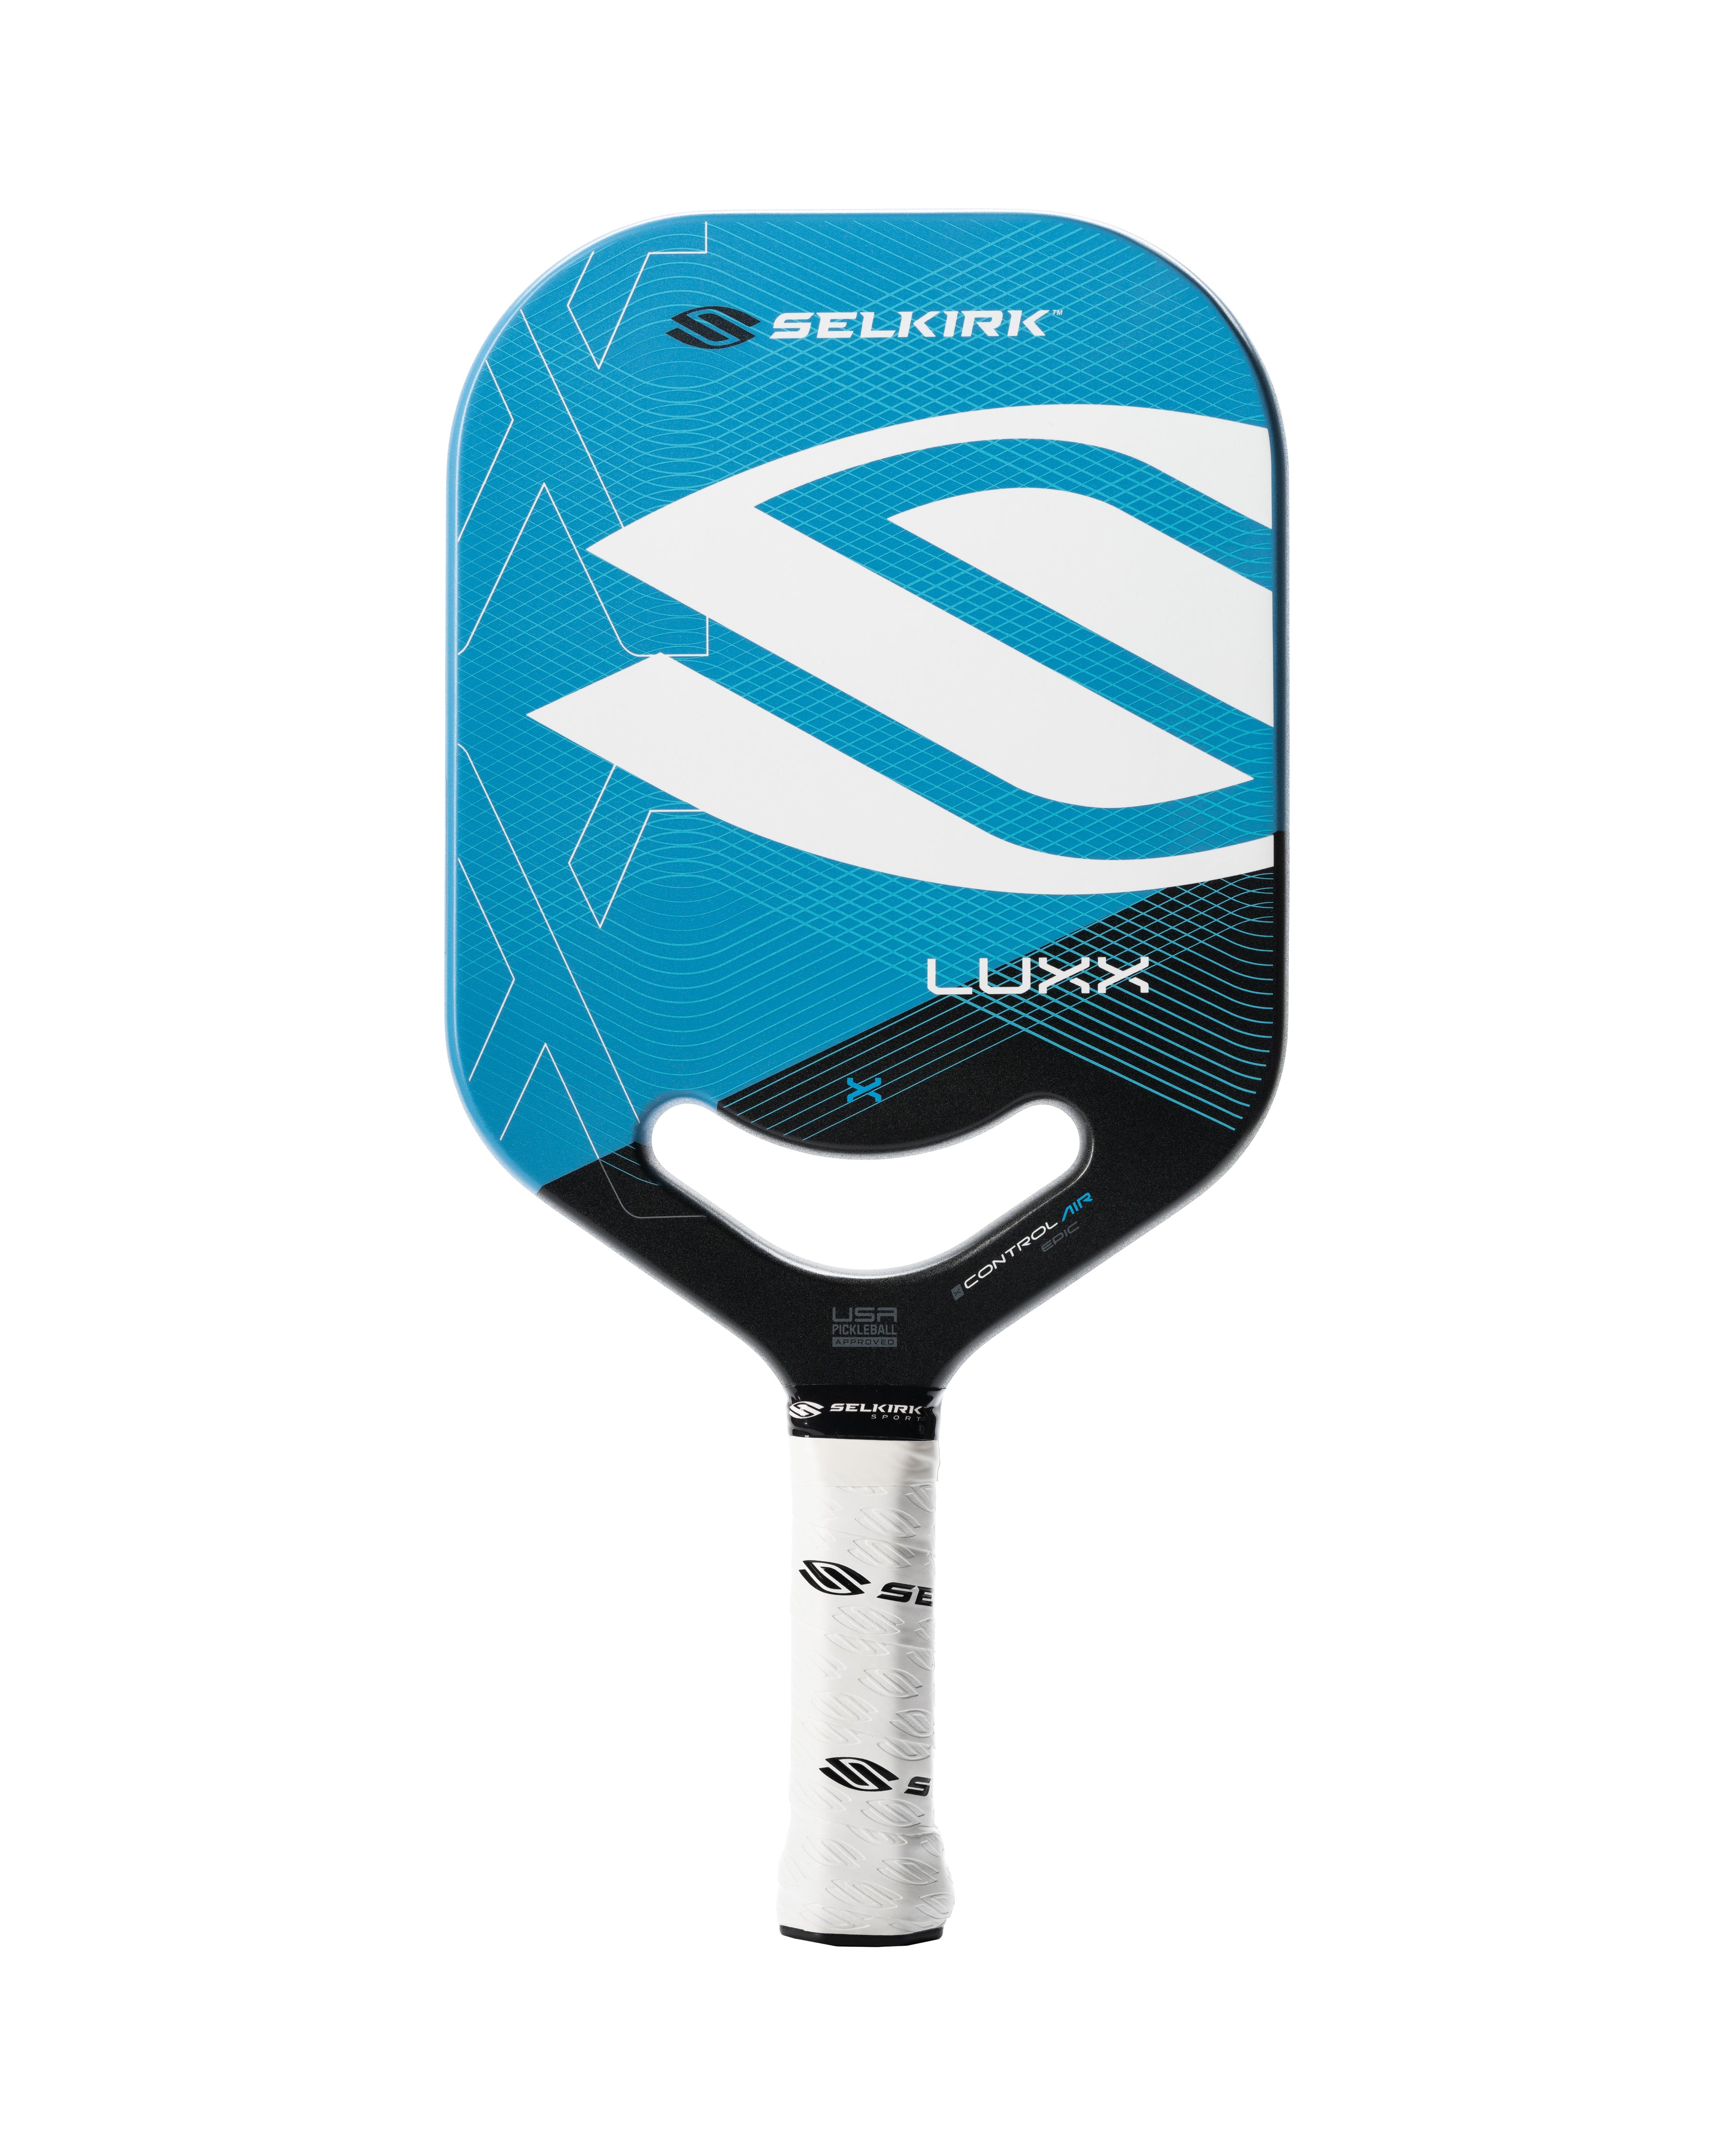 LUXX Control Air Epic Pickleball Paddle, Selkirk Sport